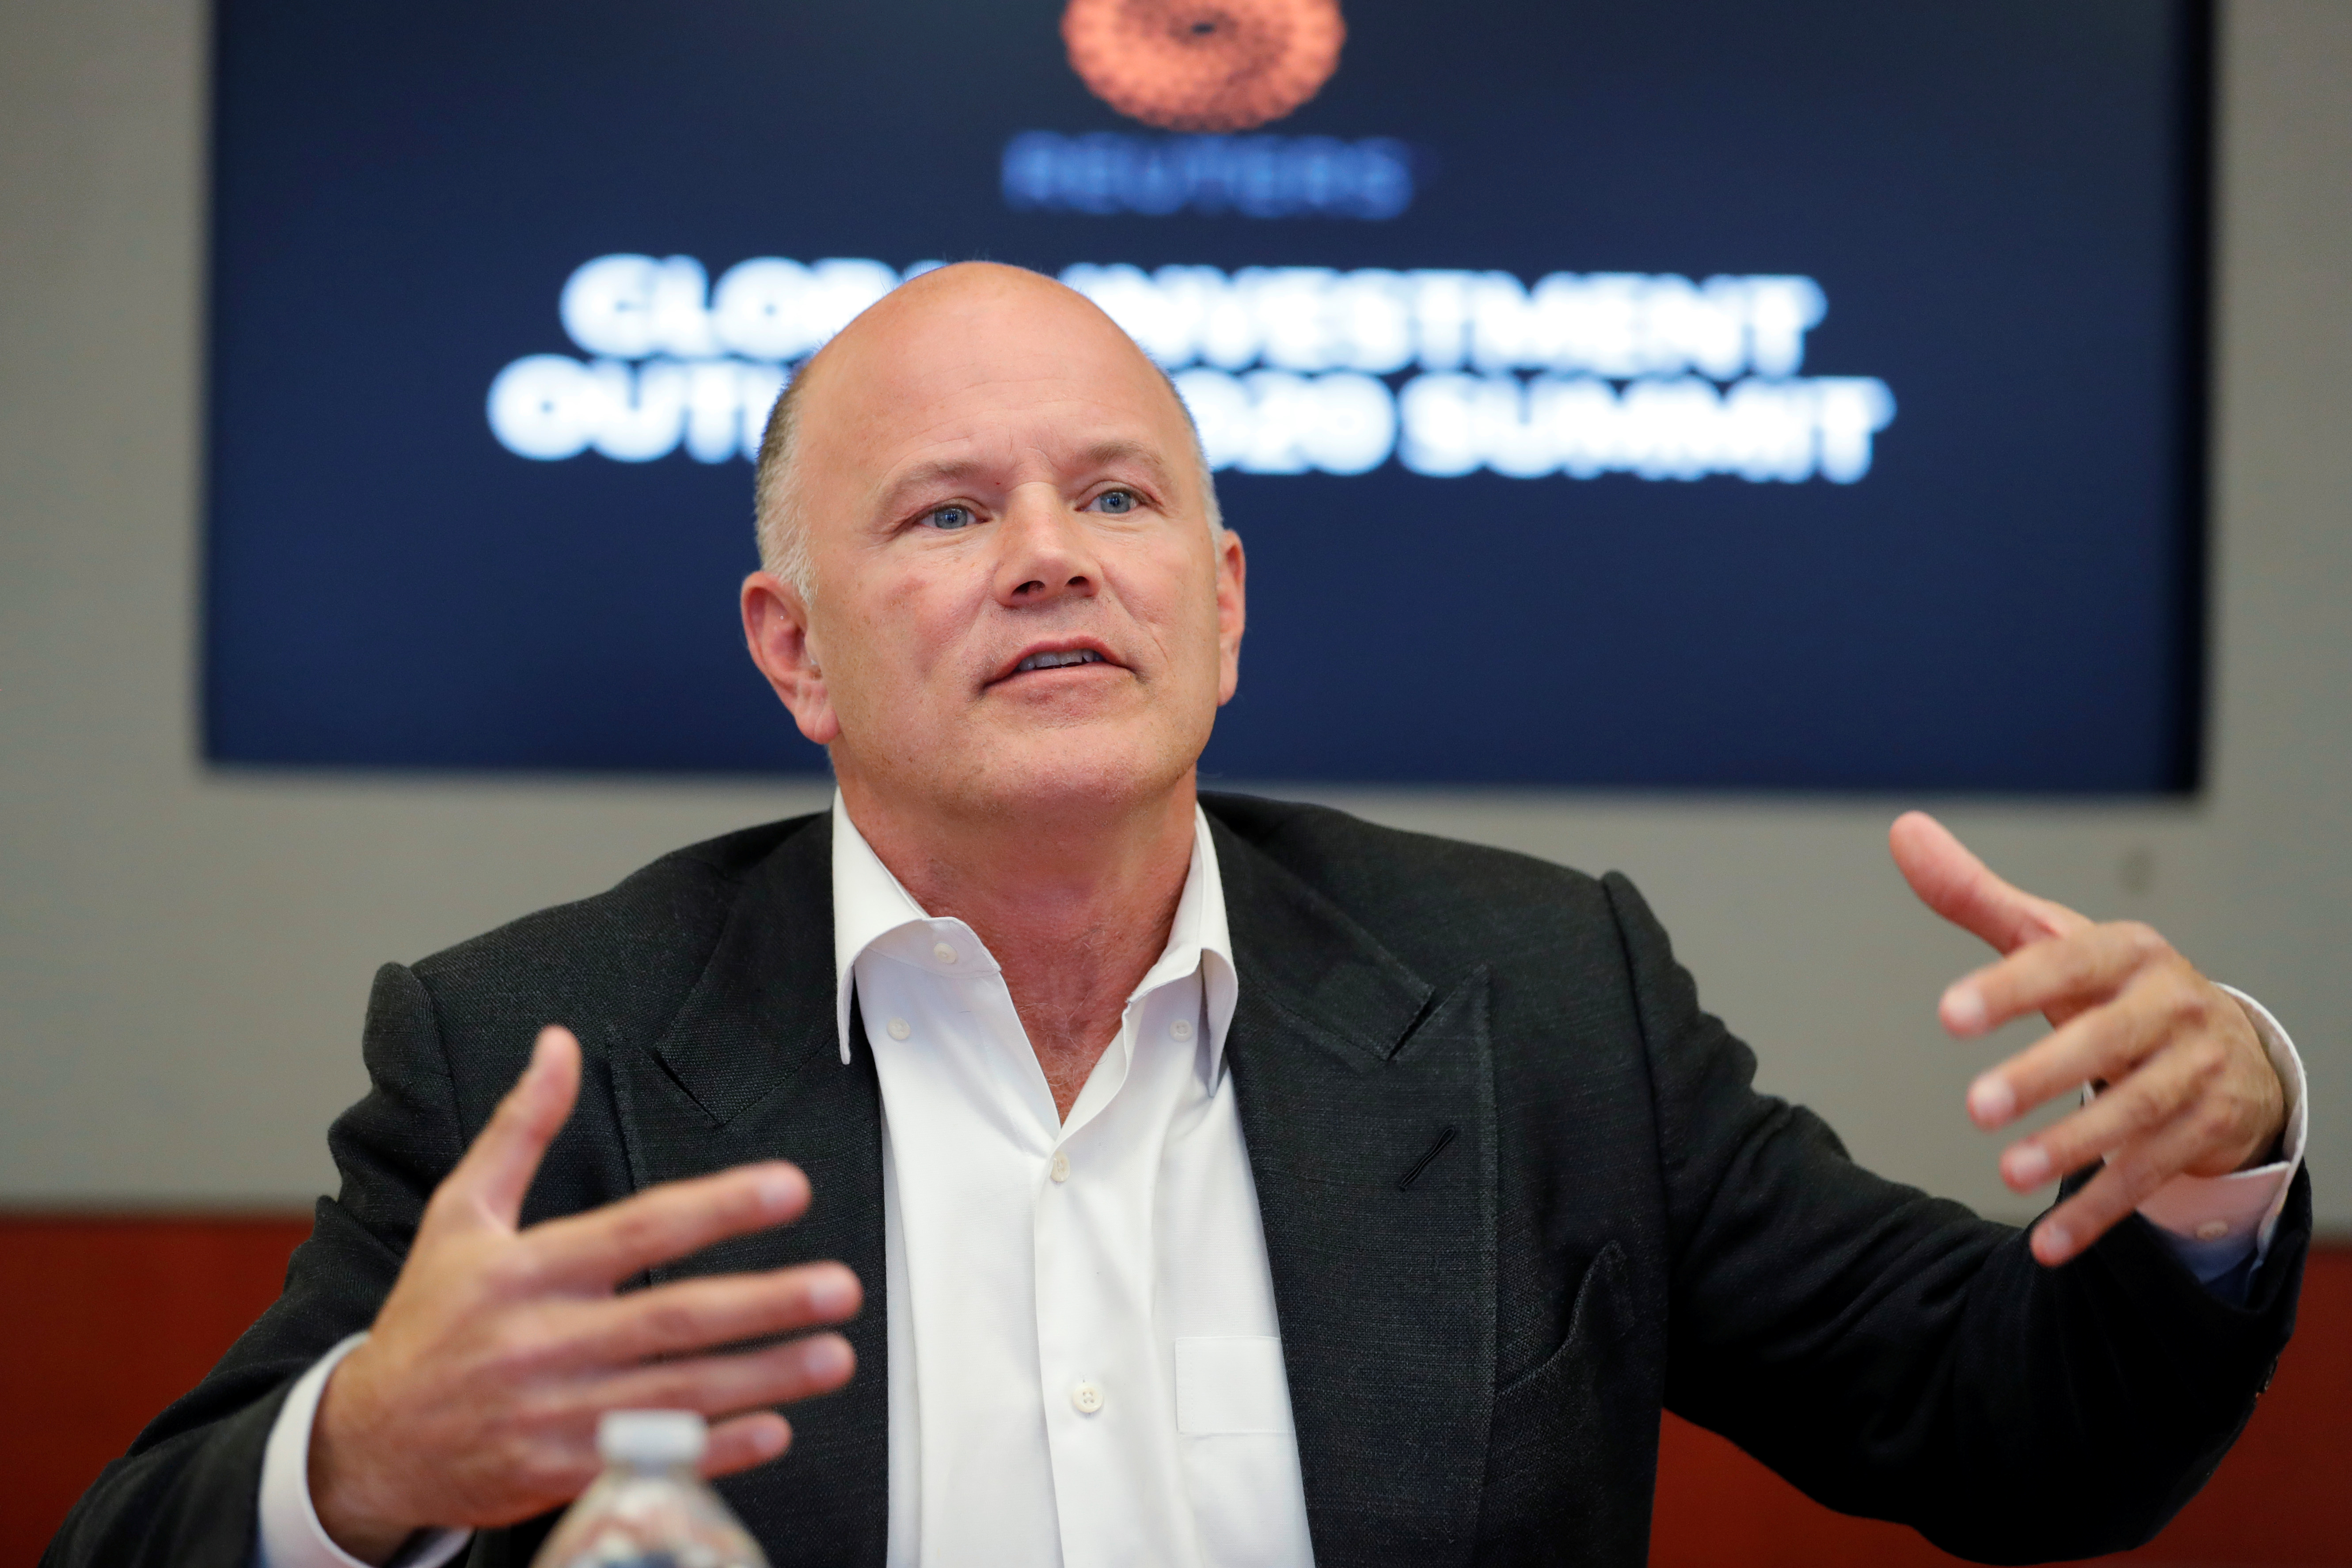 Mike Novogratz, Galaxy Digital founder, speaks during a Reuters investment summit in New York City